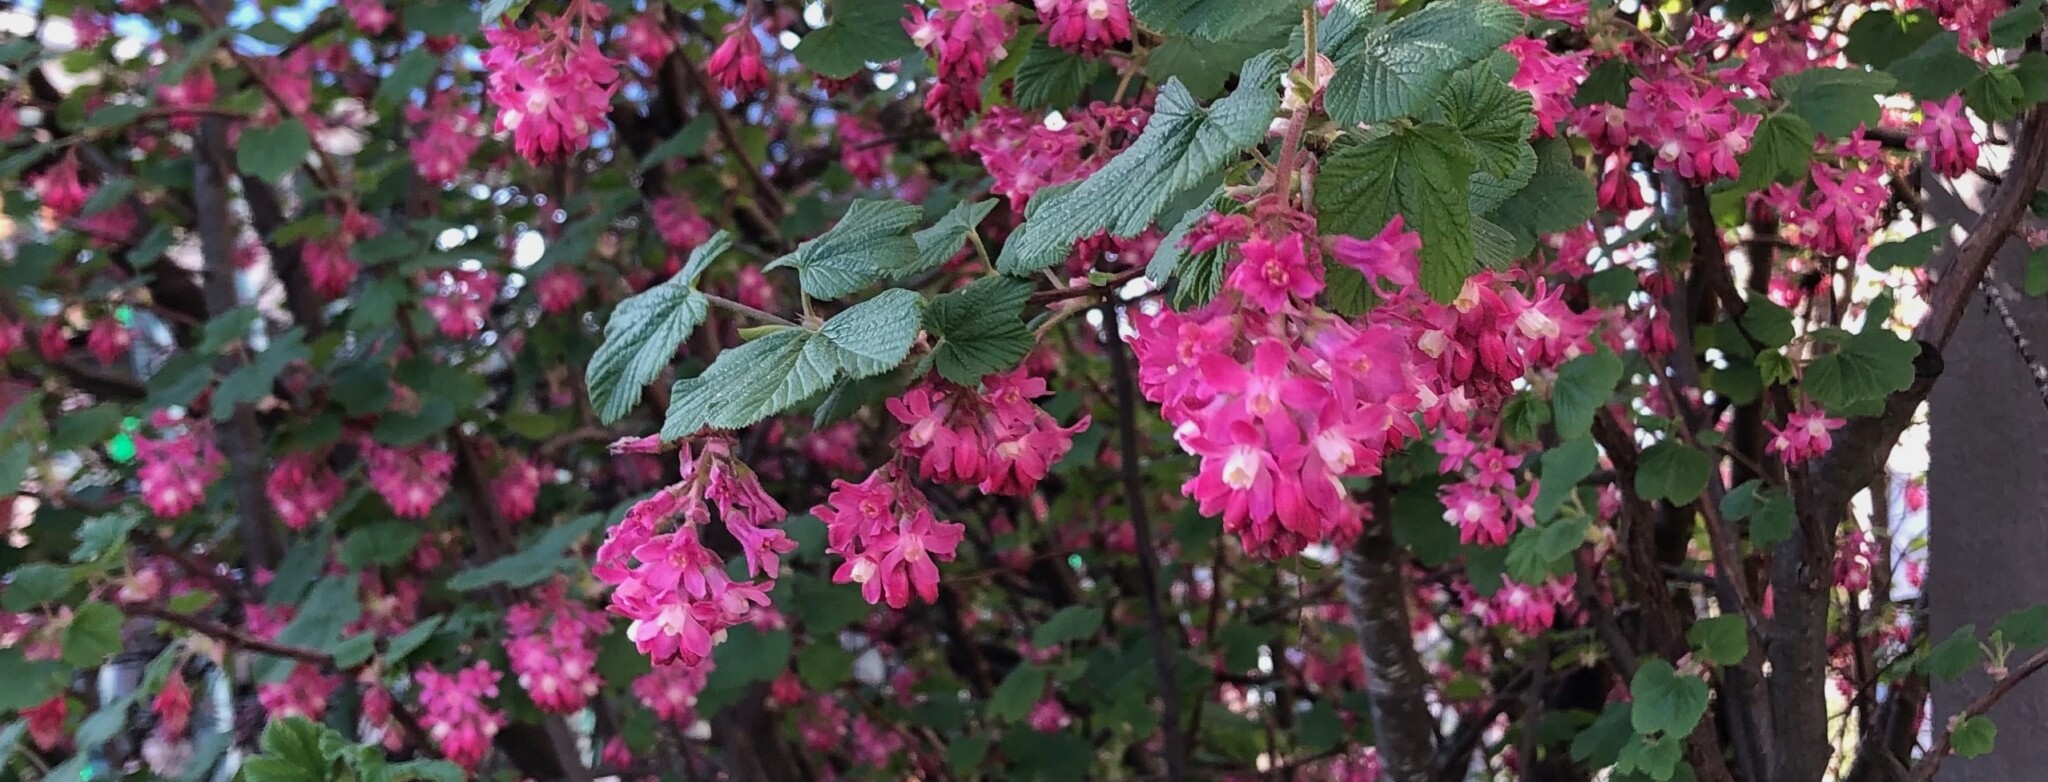 PLANT OF THE WEEK #68: Ribes sanguineum